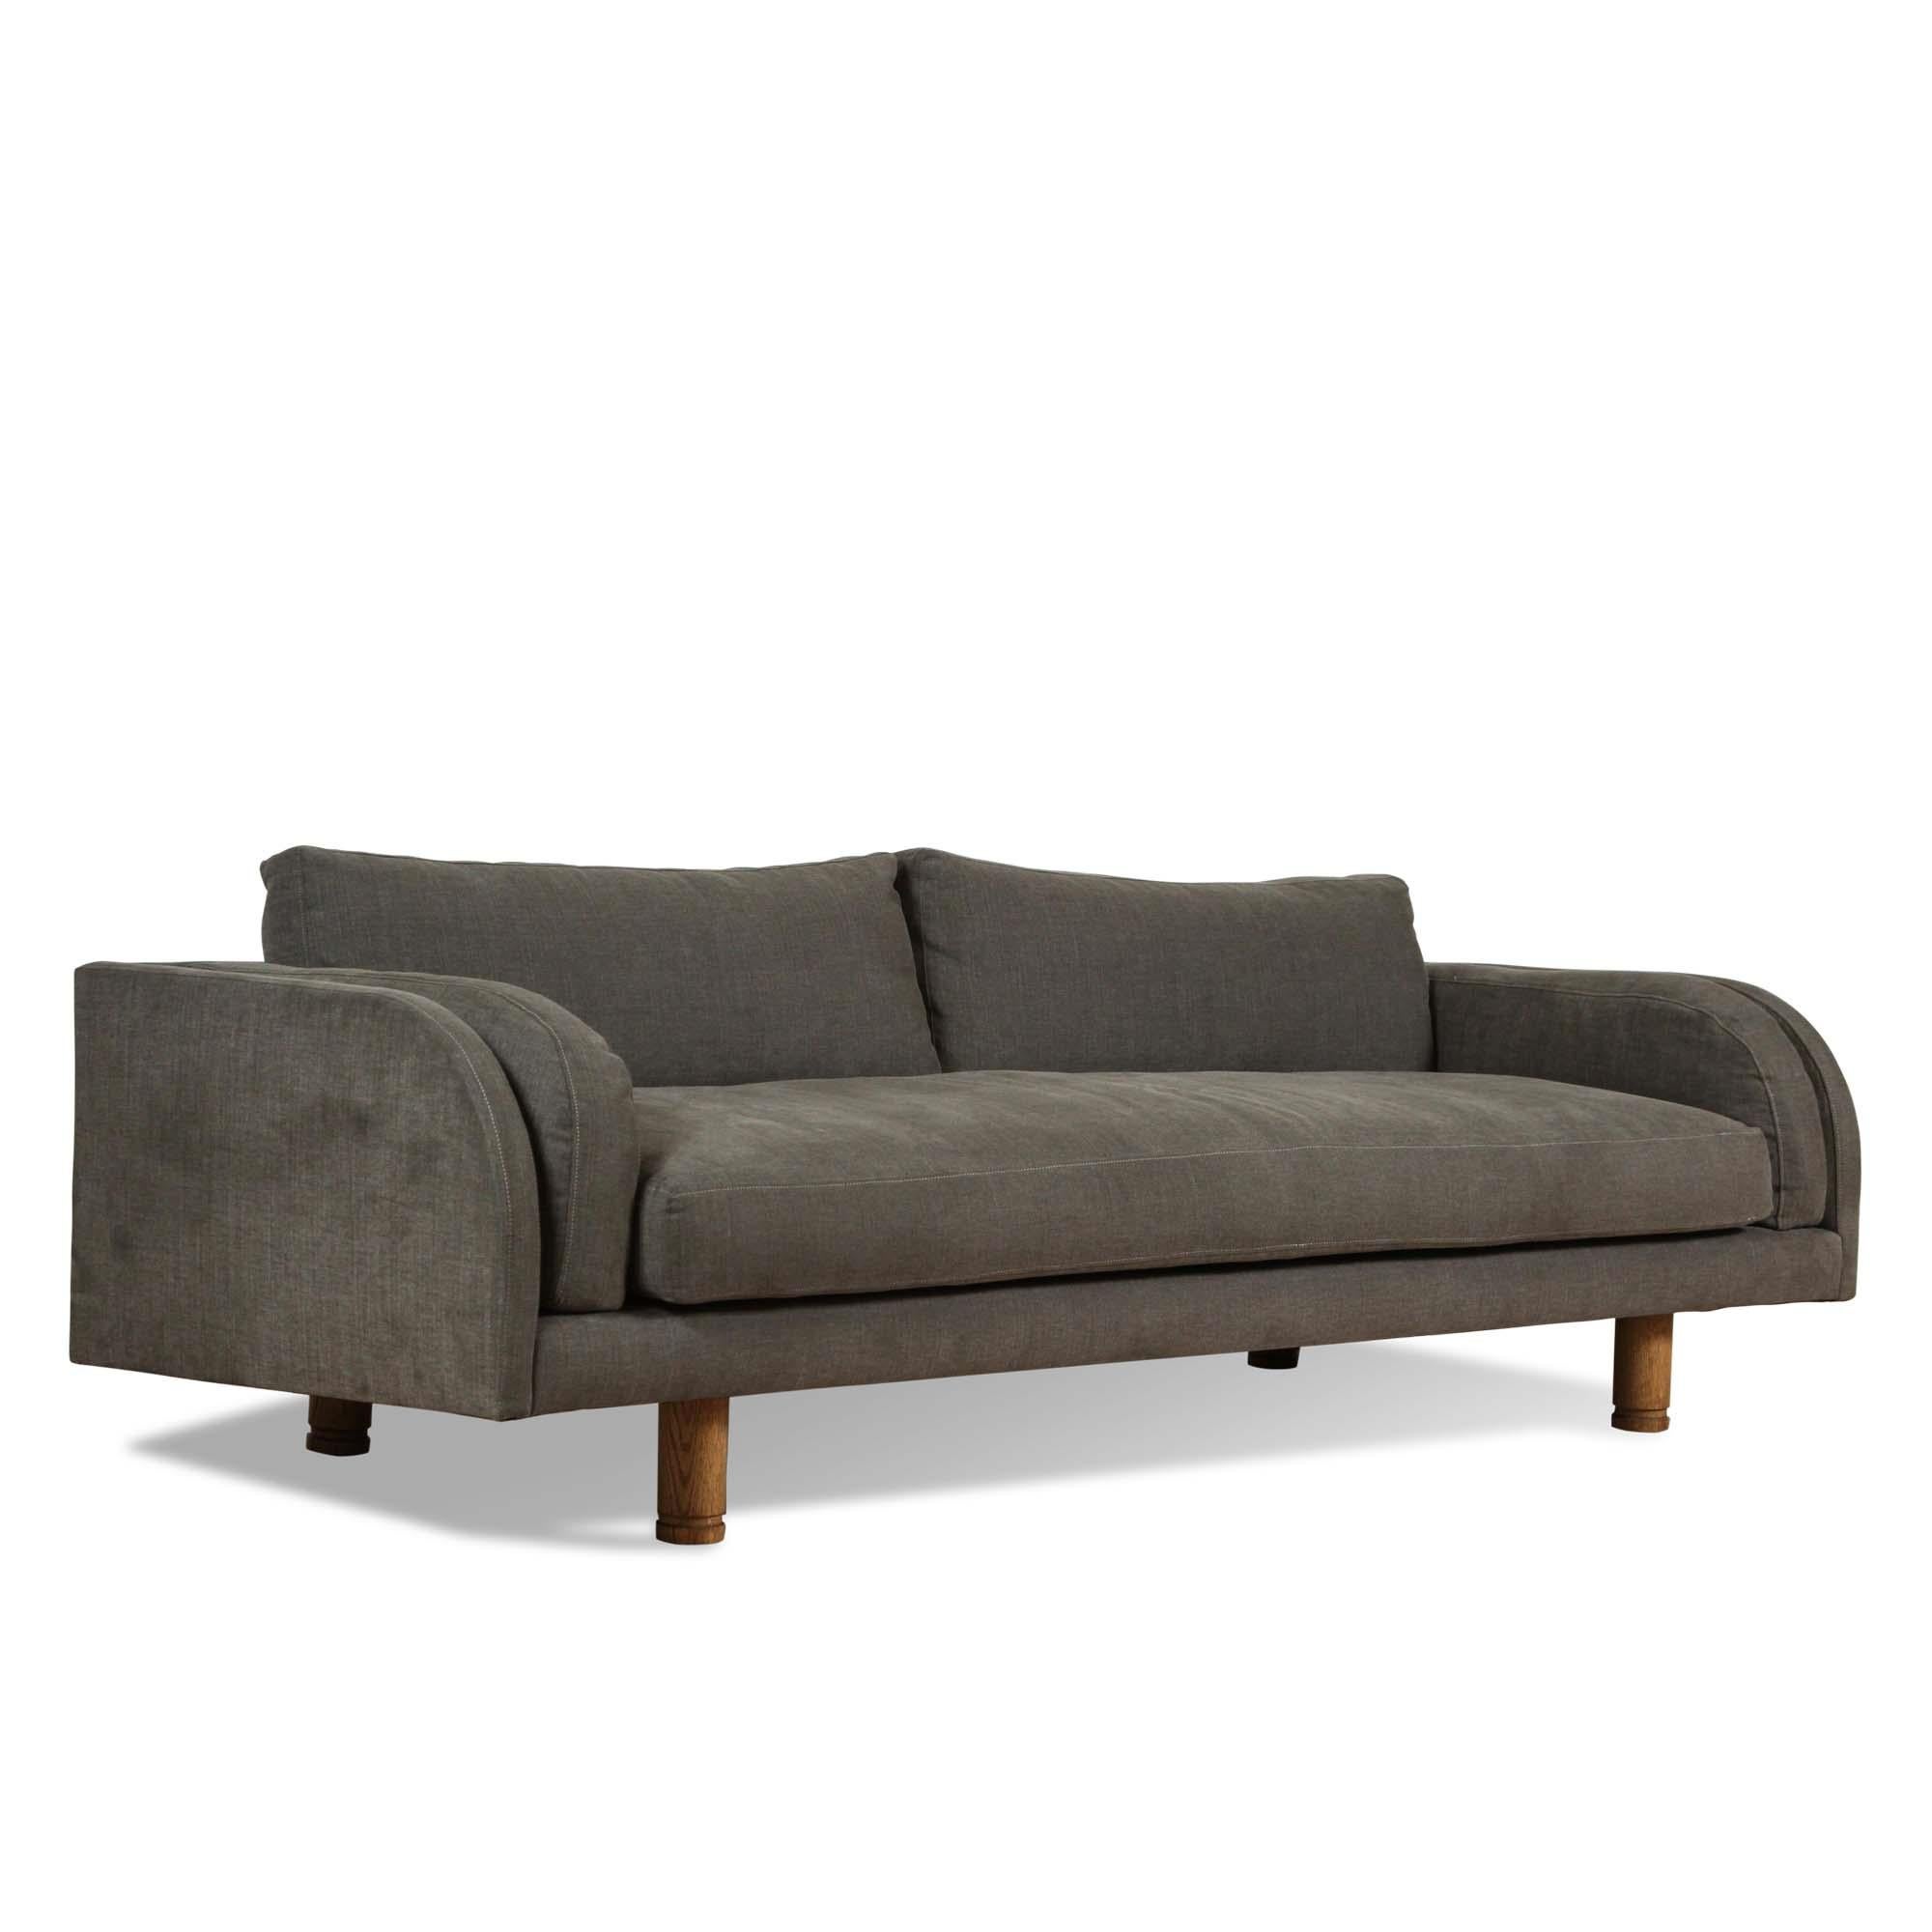 The Moreno sofa sits low and deep with Italian inspired curved arms. The sofa features loose seat and back cushions and two side cushions that mimic the curvature of the arms. The legs have an incised detail and are made of solid American walnut or